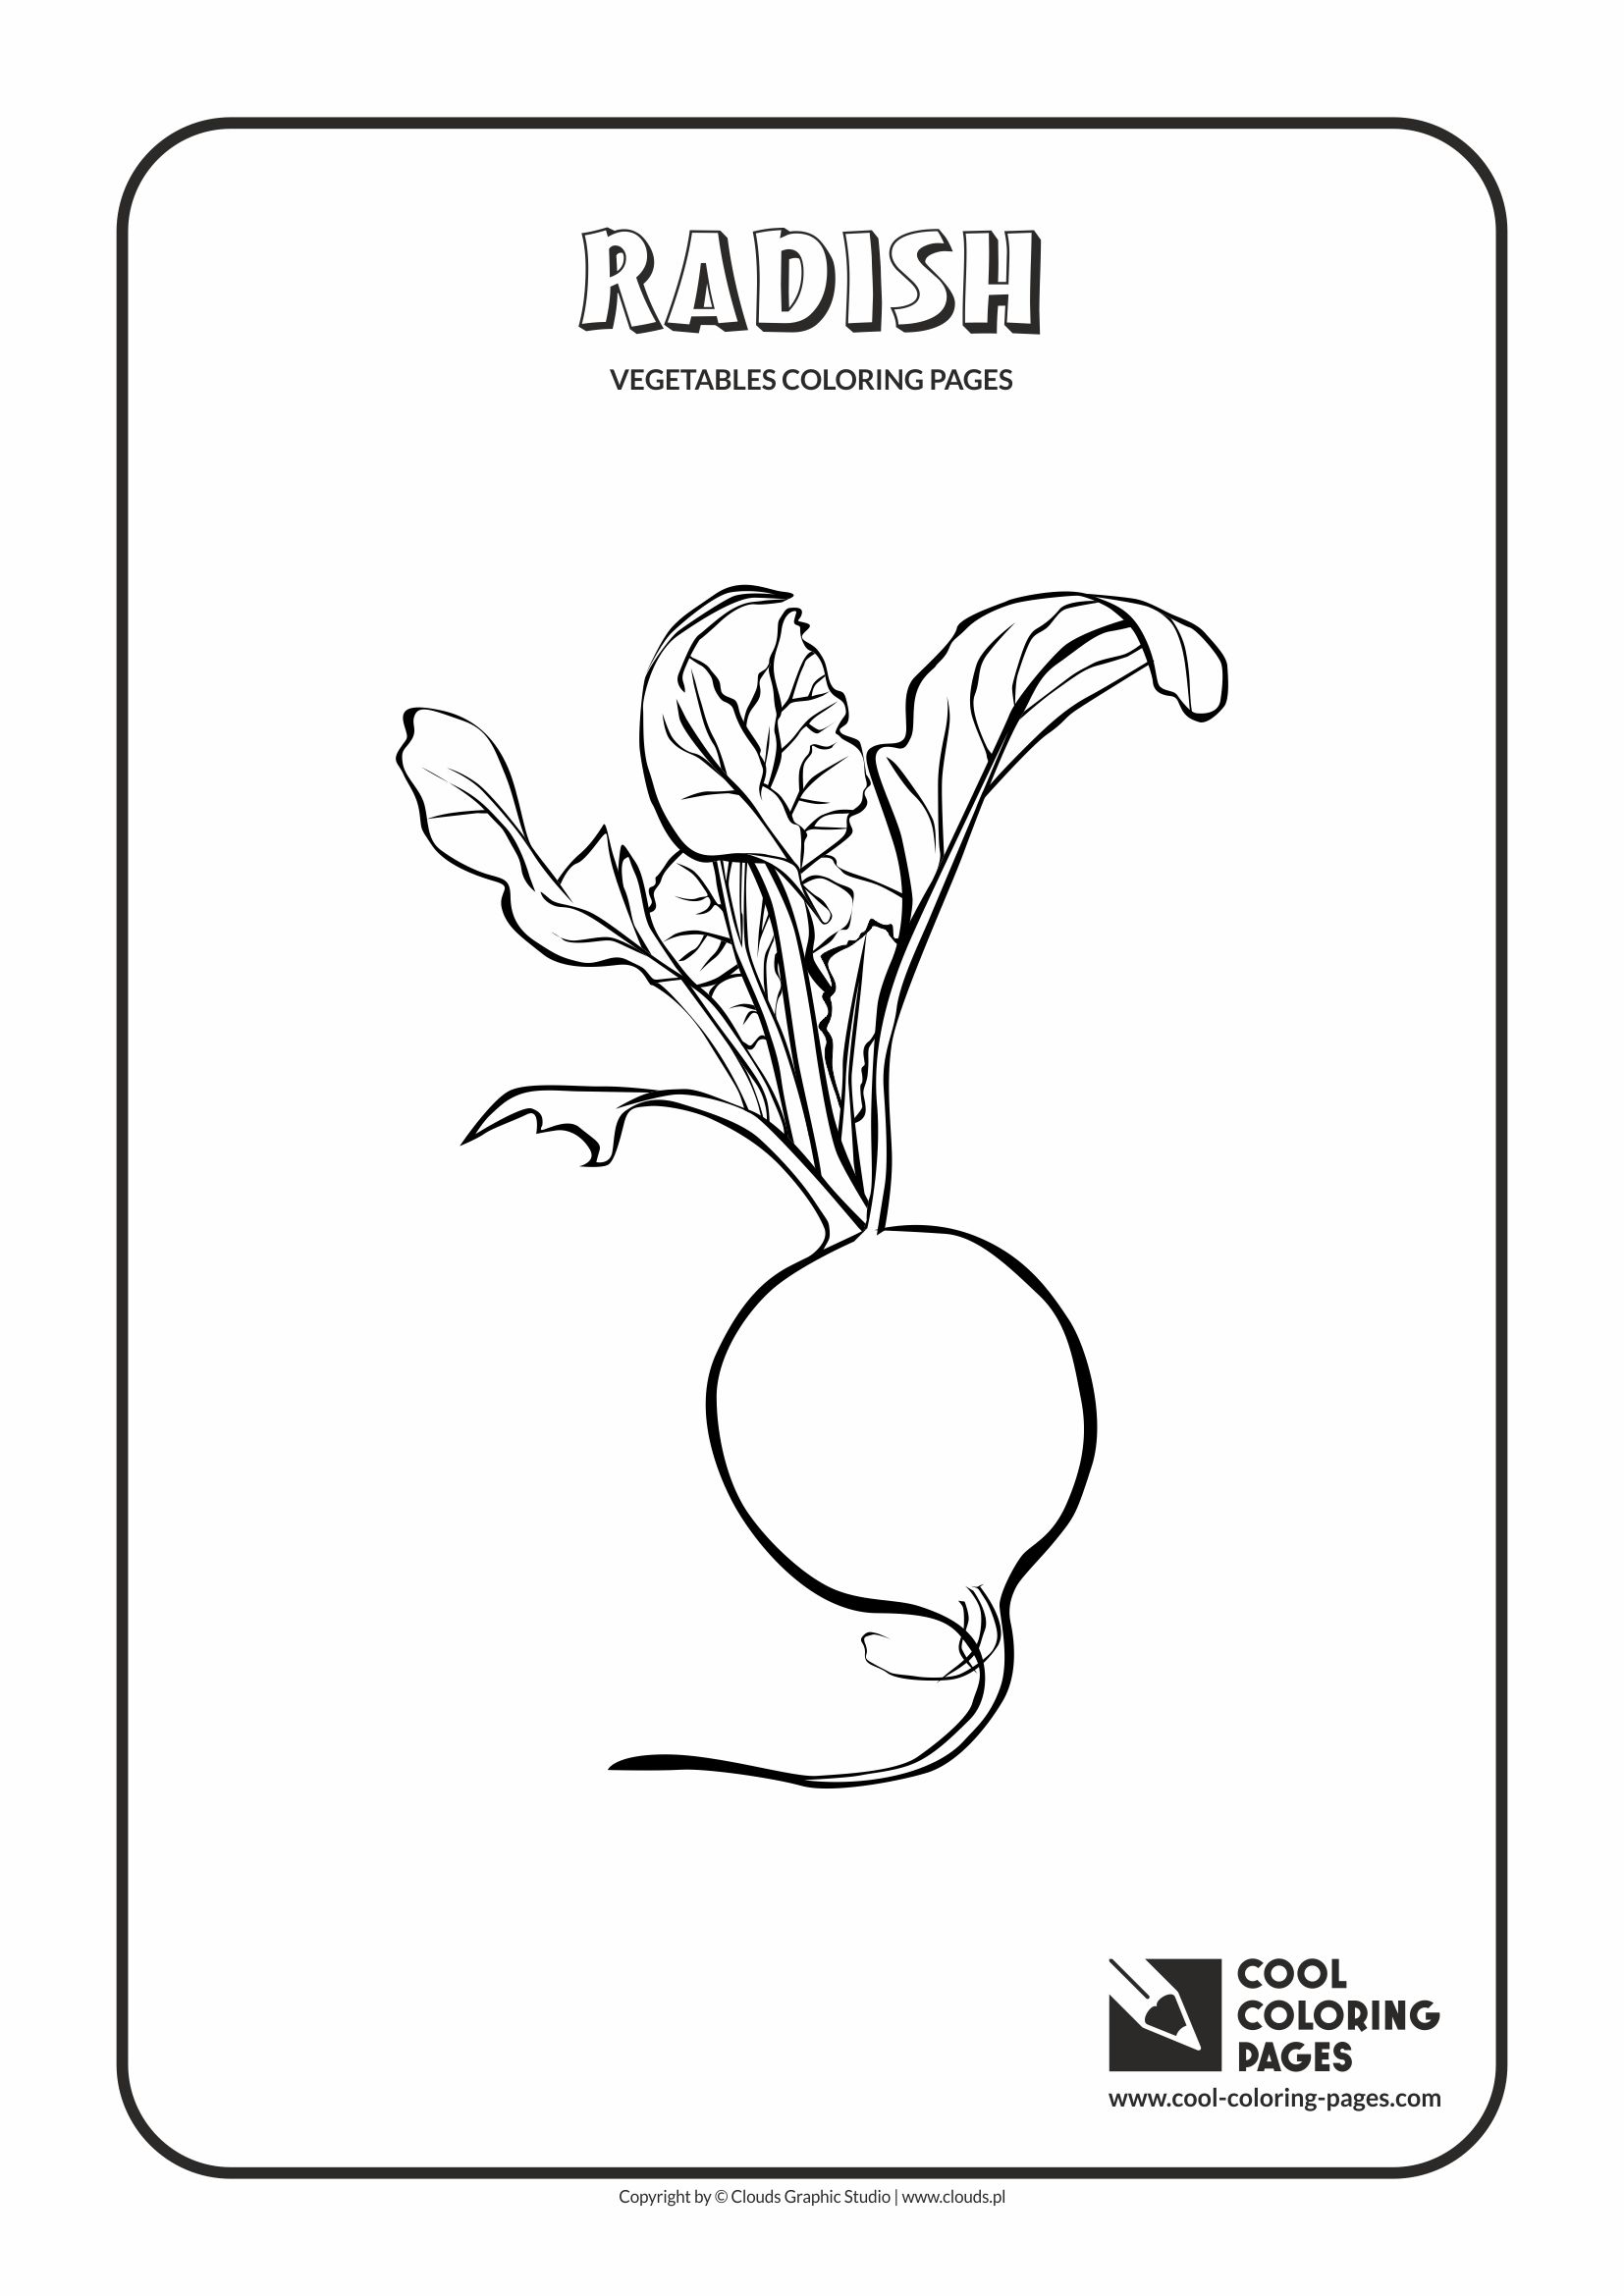 Cool Coloring Pages - Plants / Radish / Coloring page with radish